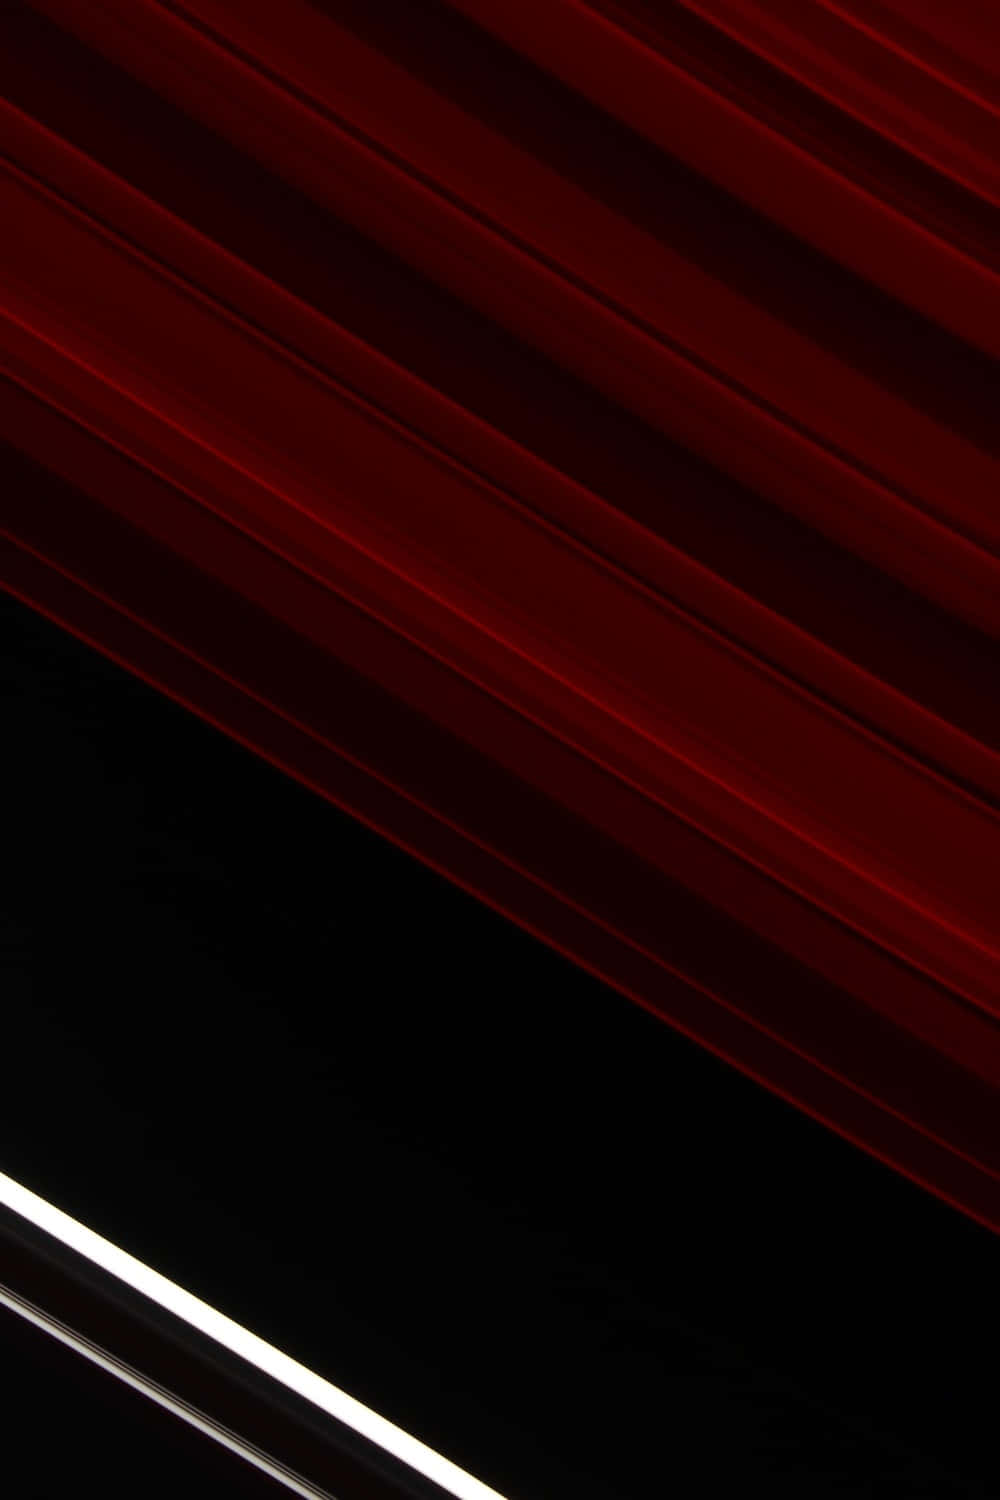 A Red And Black Image Of A Saturn